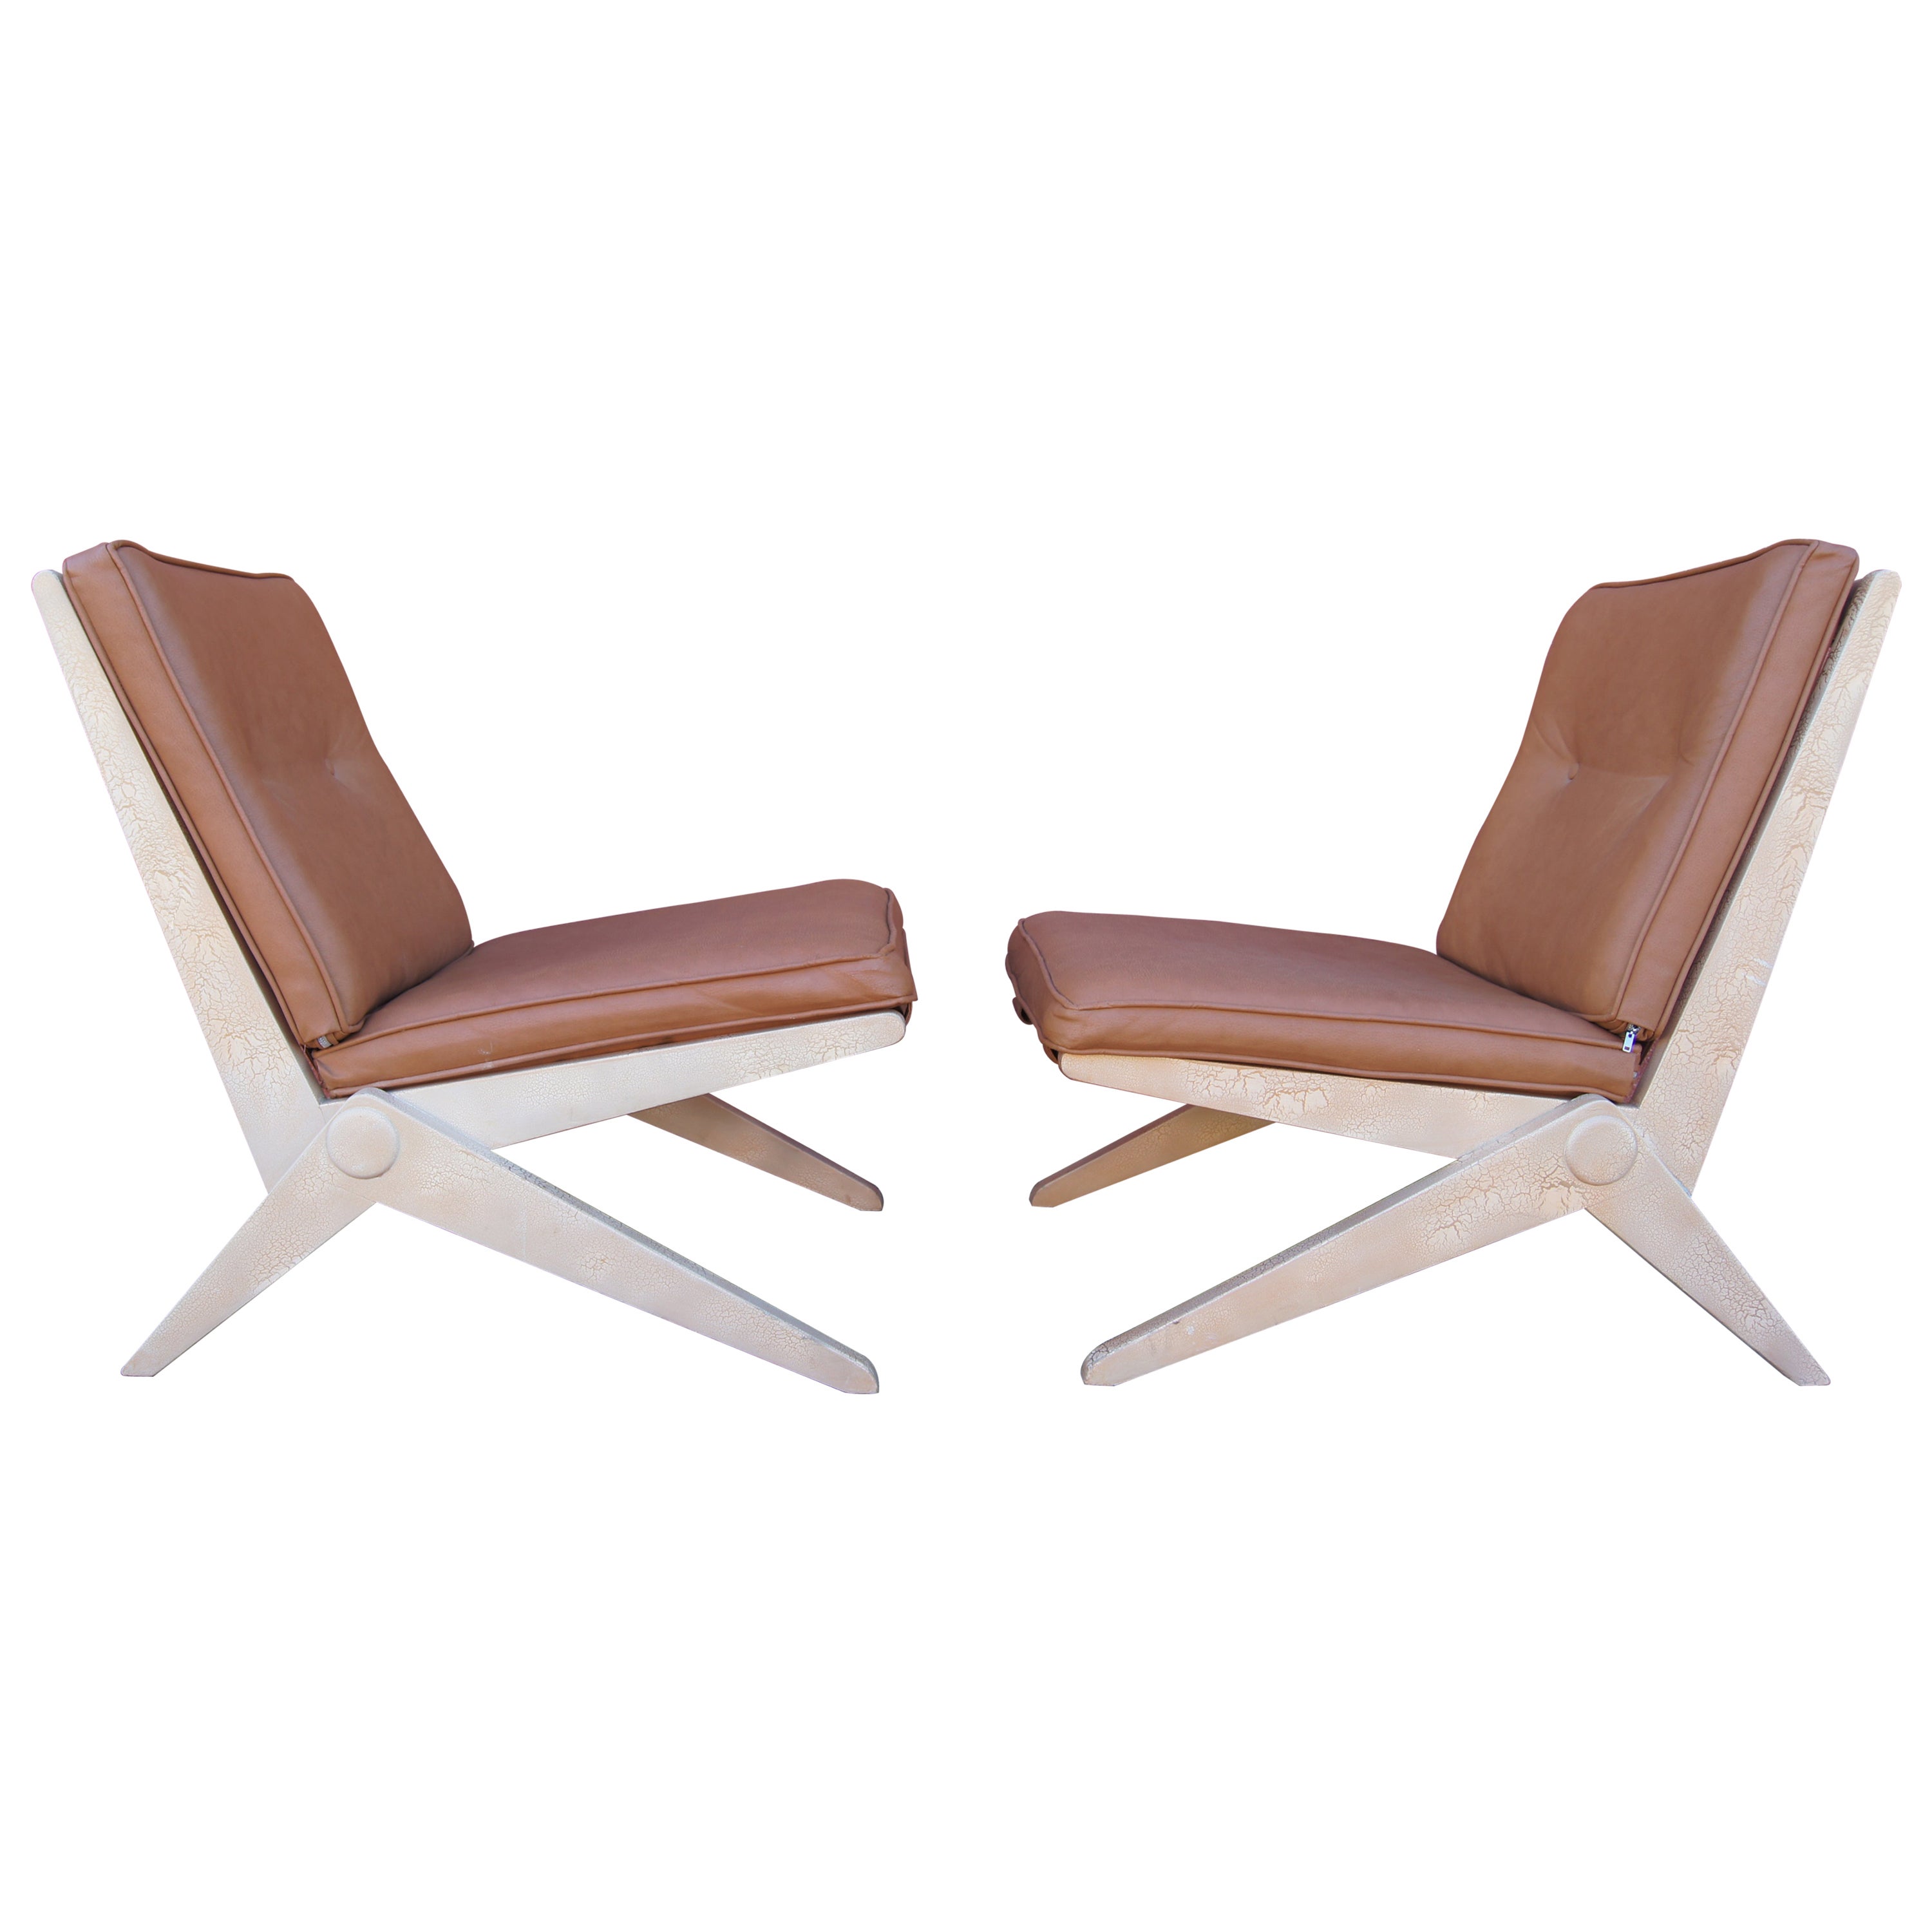 Pair of Scissor Chairs, Model 92, by Pierre Jeanneret for Knoll